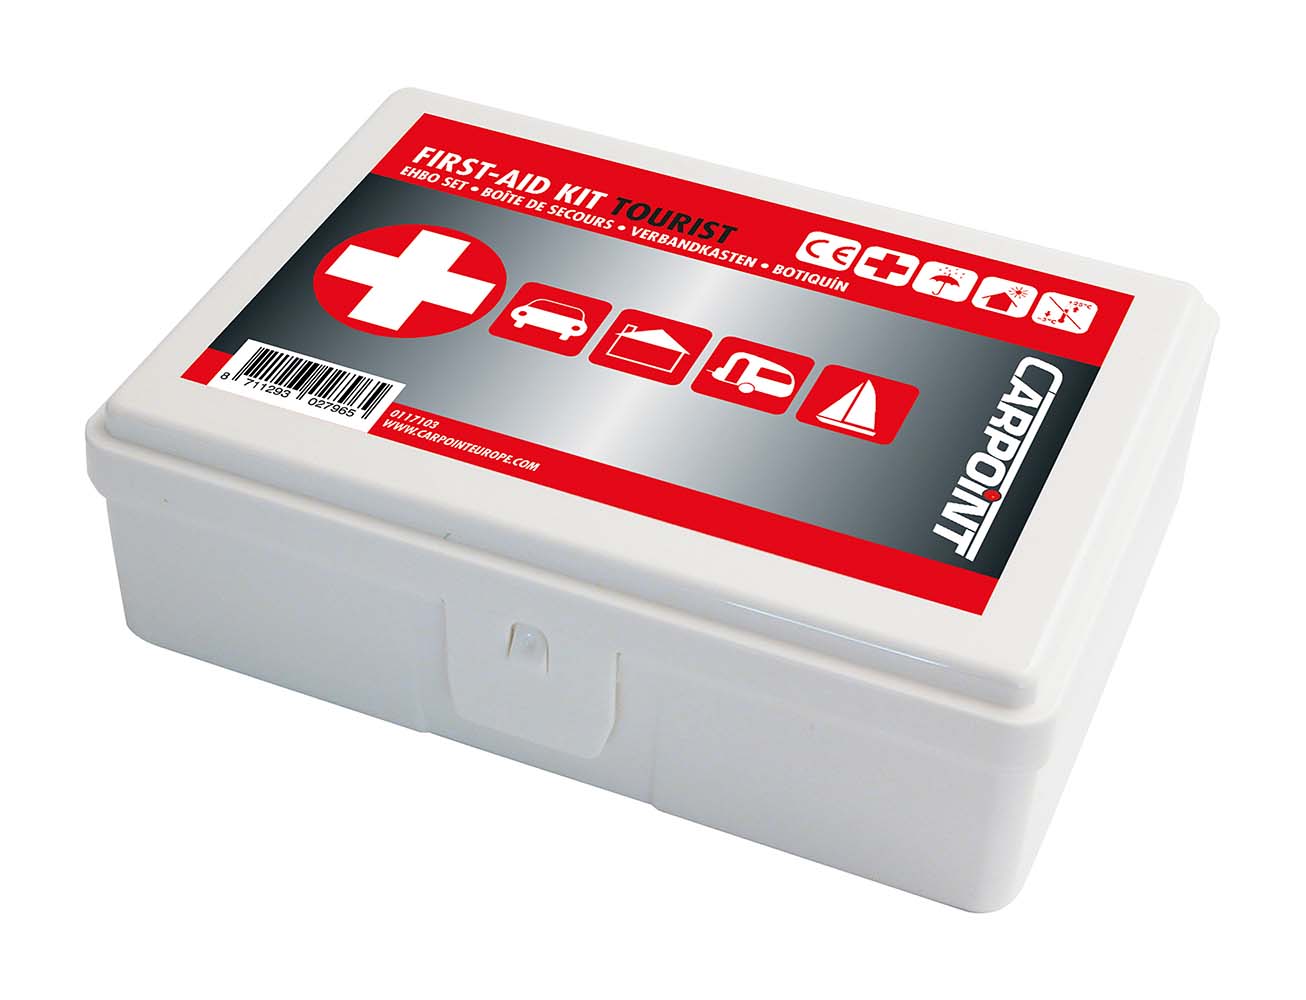 5117103 A 21-piece first aid kit. Easy to carry due to its compact travel size. The sturdy plastic box contains: 2 sterile gauzes 1/16, 10gr cotton, elastic bandages, 1 scissors, 1 tweezers, 1 pair of disposable gloves, 10 bandages and 3 antiseptic wipes.